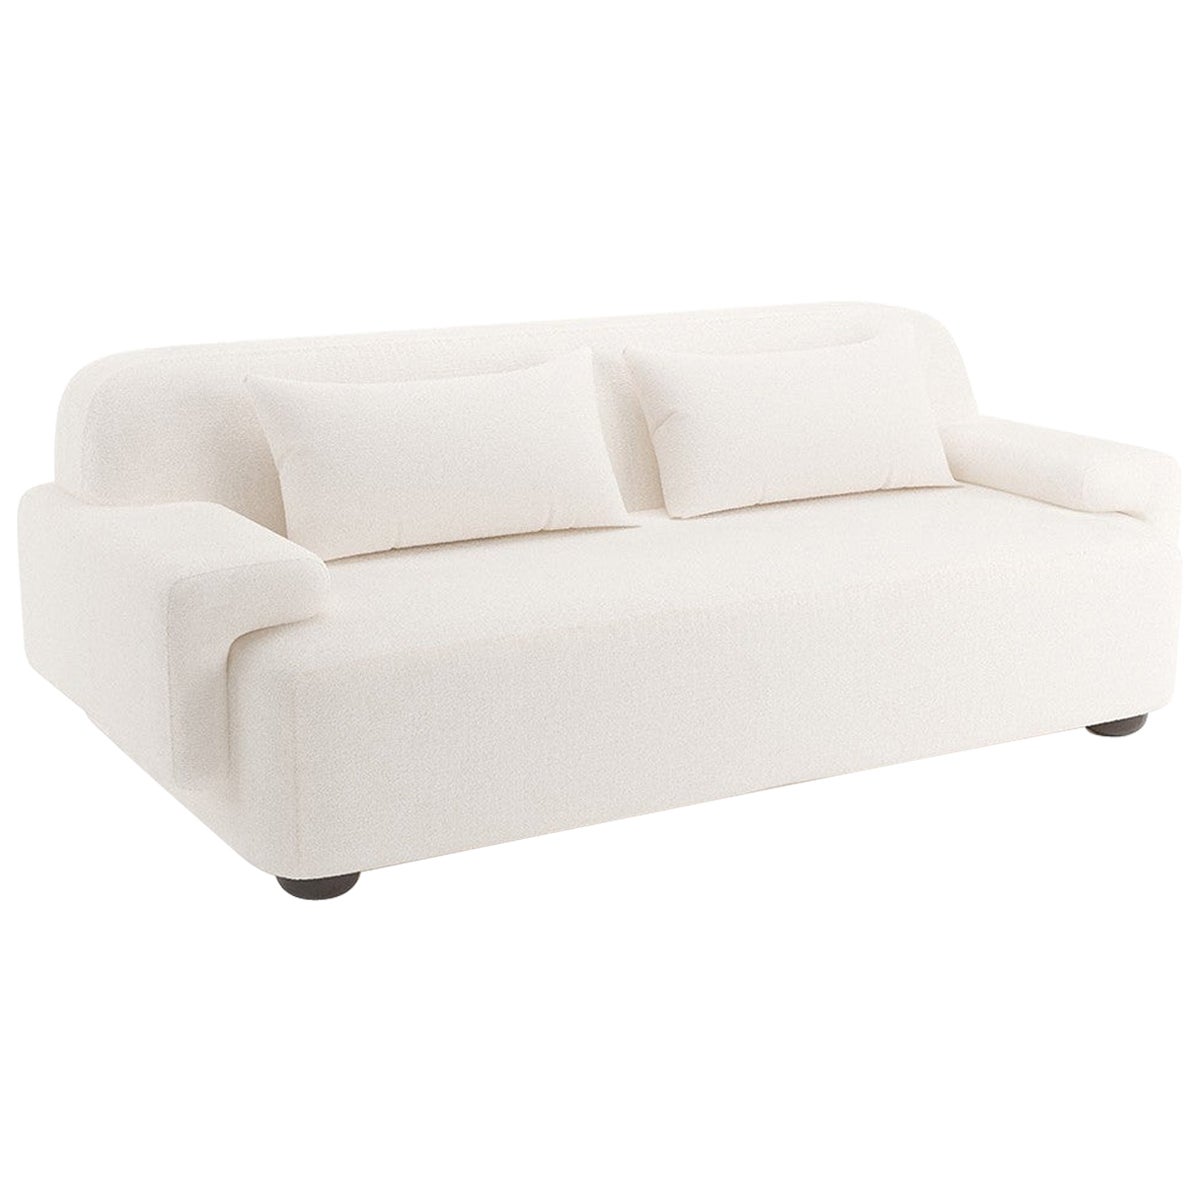 Popus Editions Lena 4 Seater Sofa in Egg Shell Off-White Malmoe Terry Fabric For Sale